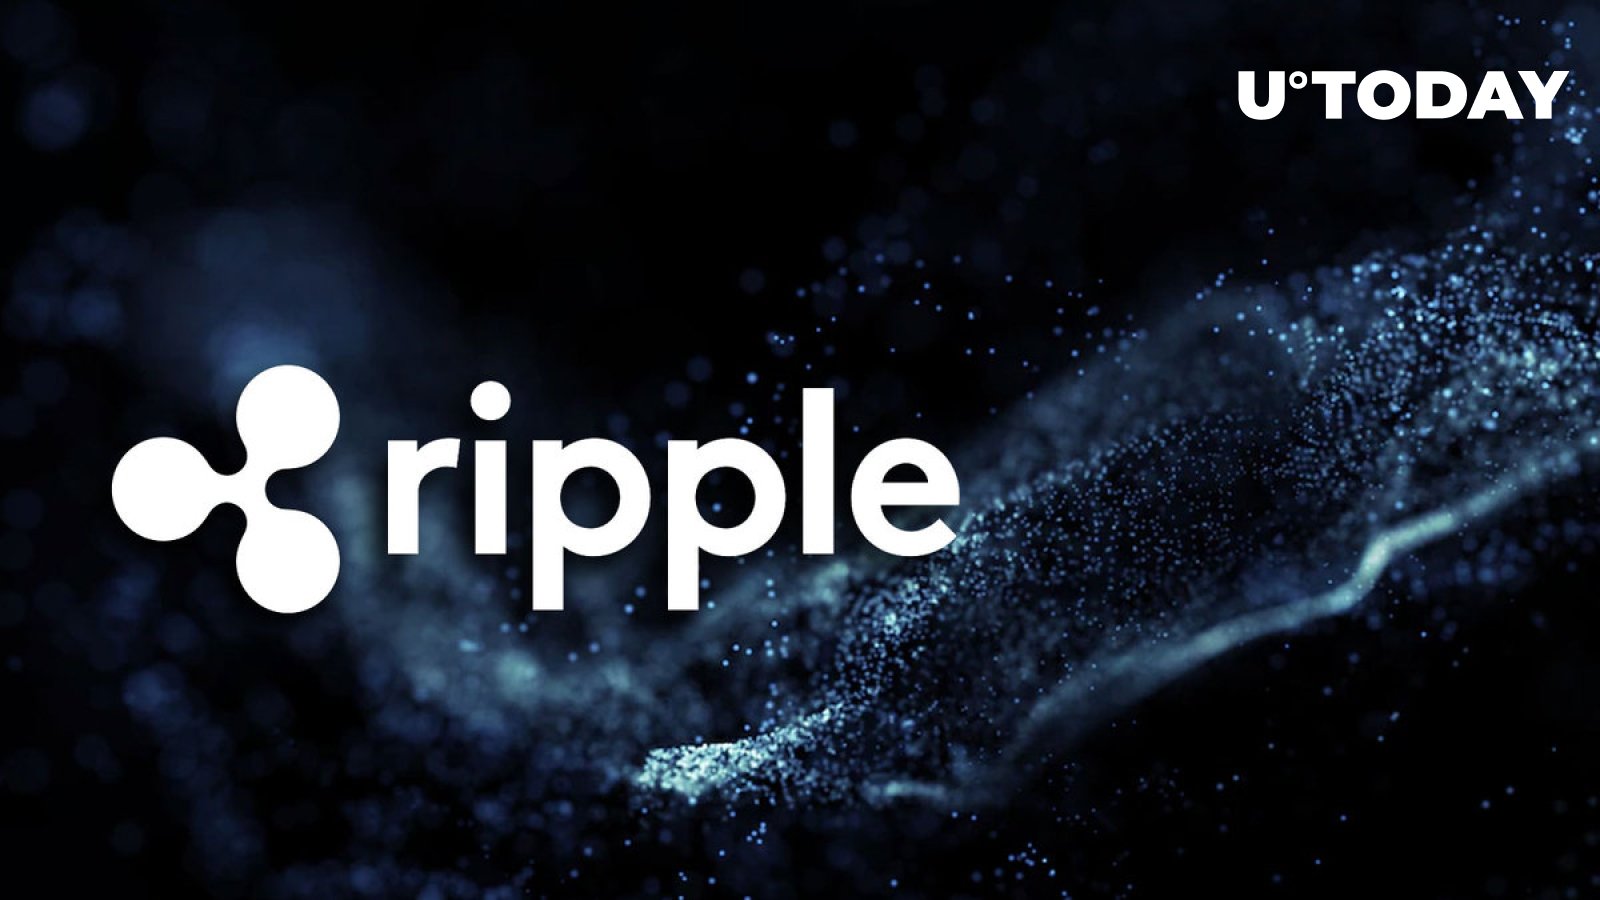 Key Details from Ripple’s Latest Report